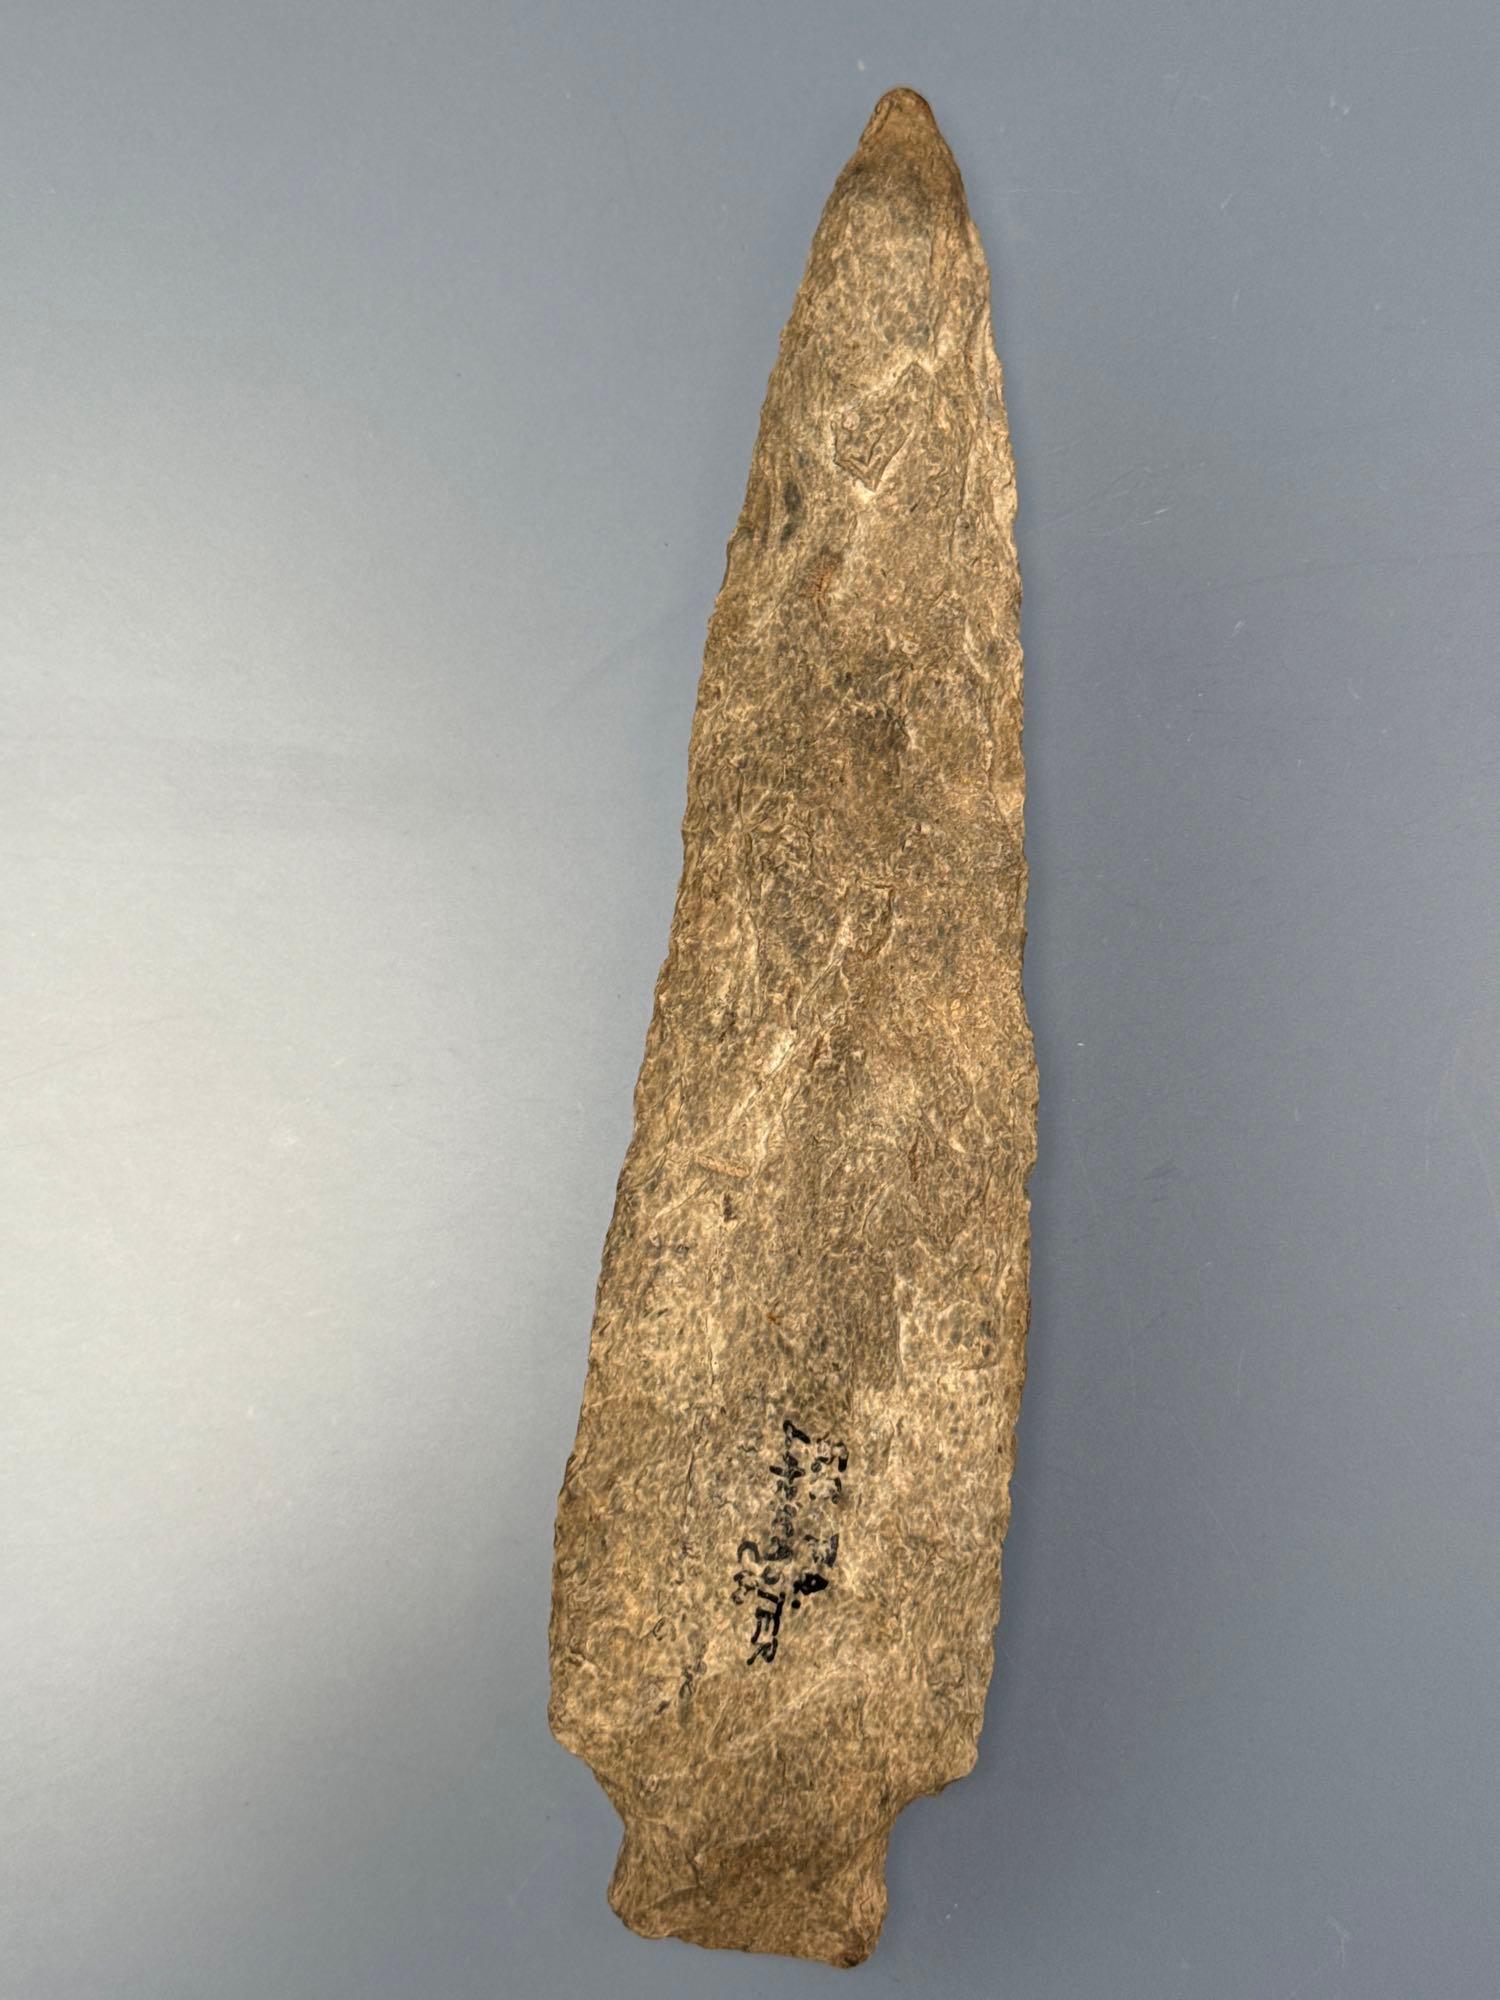 HIGHLIGHT Massive 8" Rhyolite Archaic Stem Point, HUGE and Well-Made for Size, Found in Lancaster Co